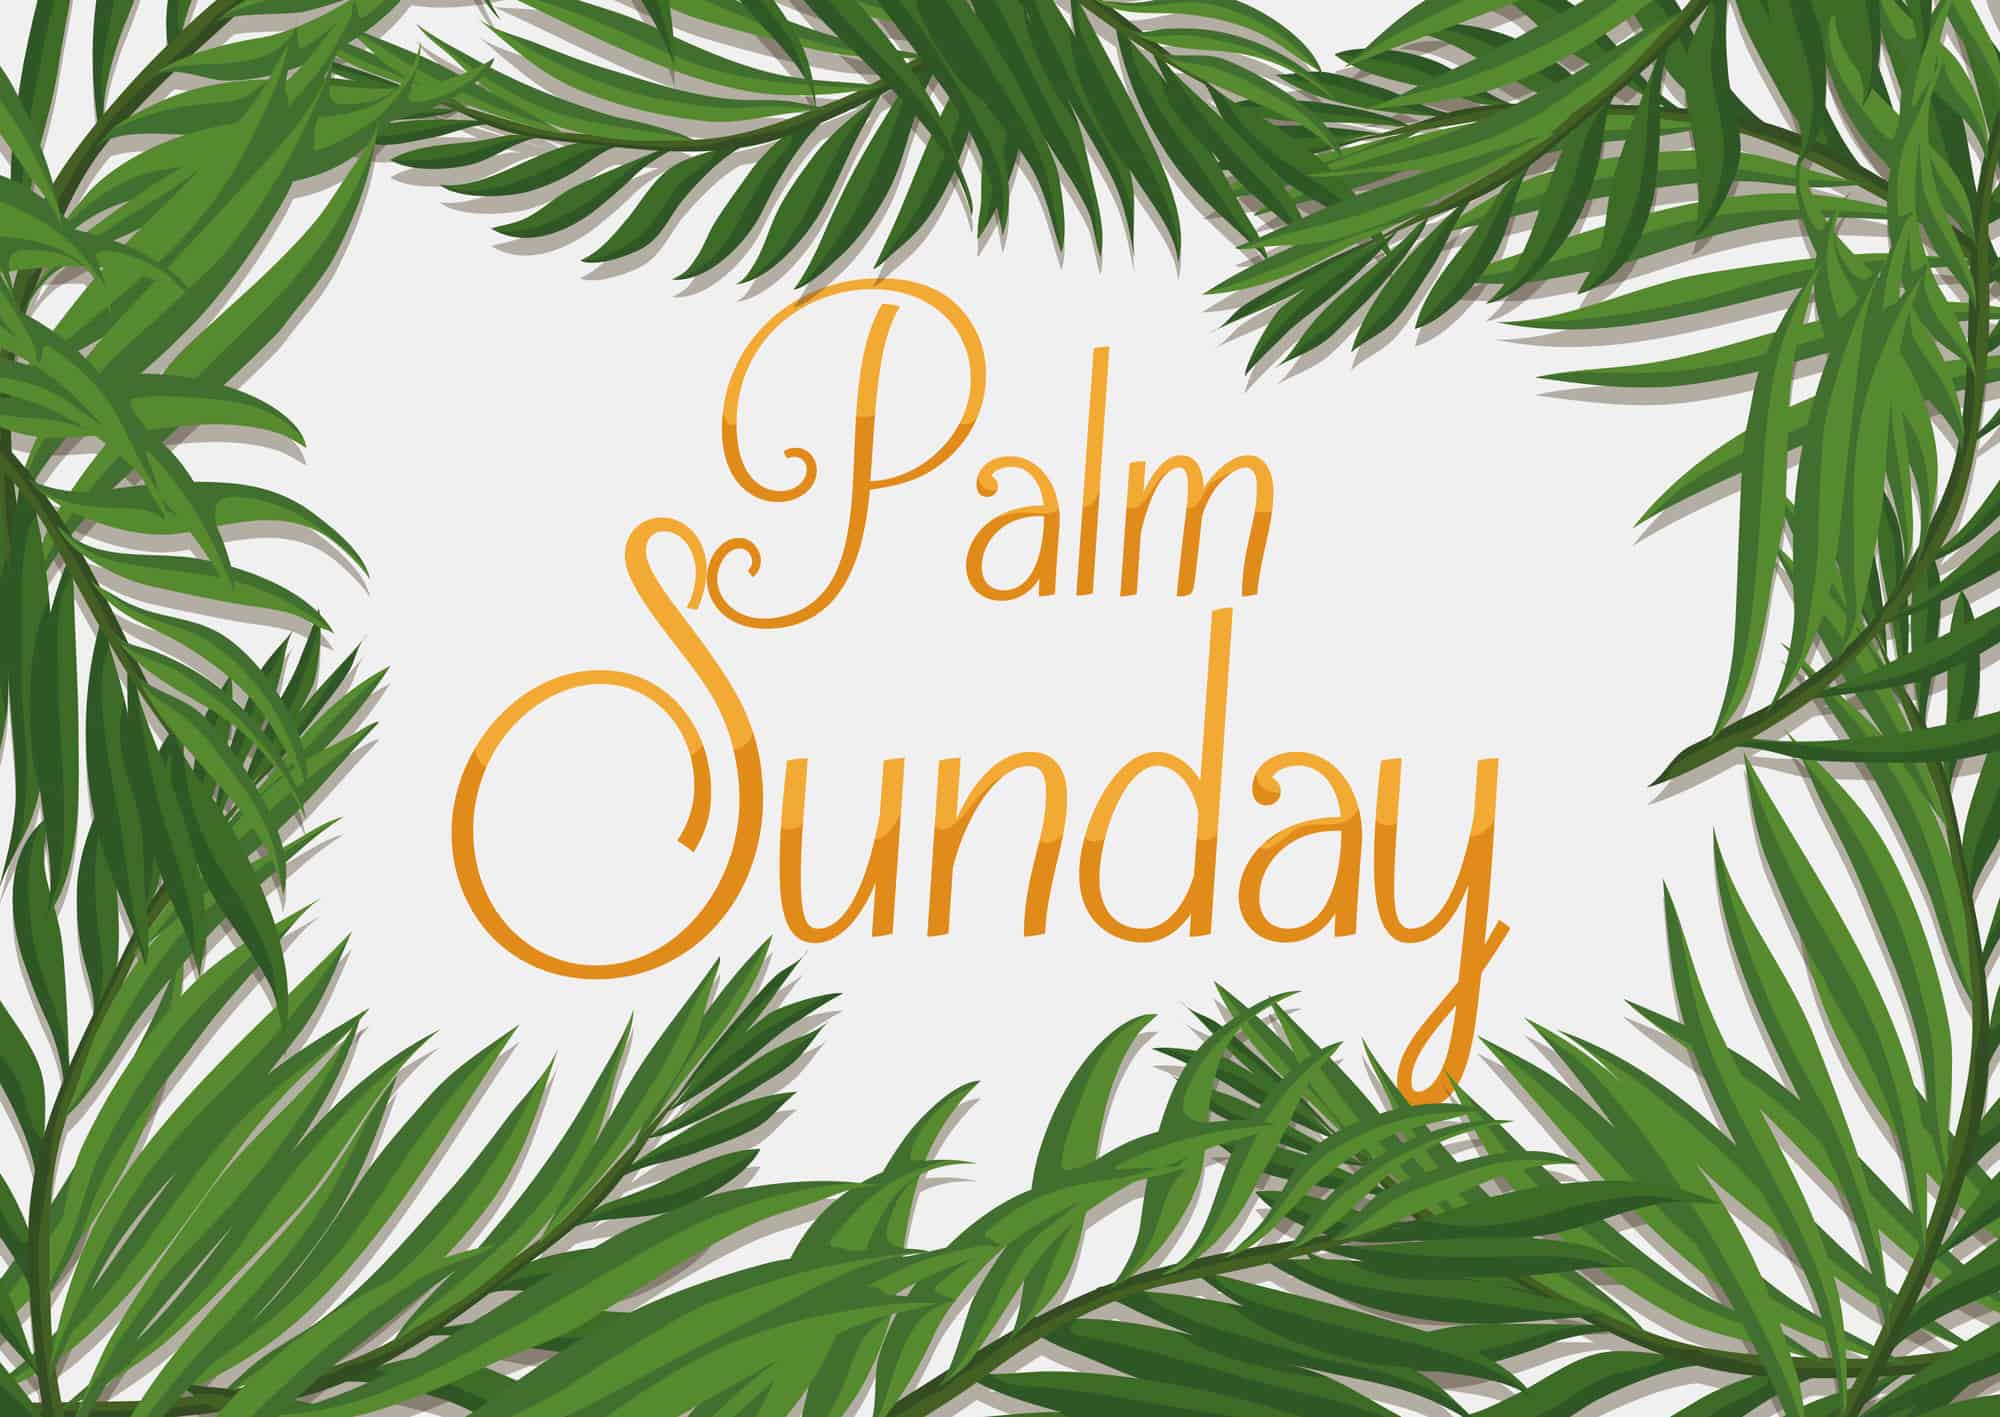 Devotion for Palm Sunday Lillie Ammann, Writer and Editor